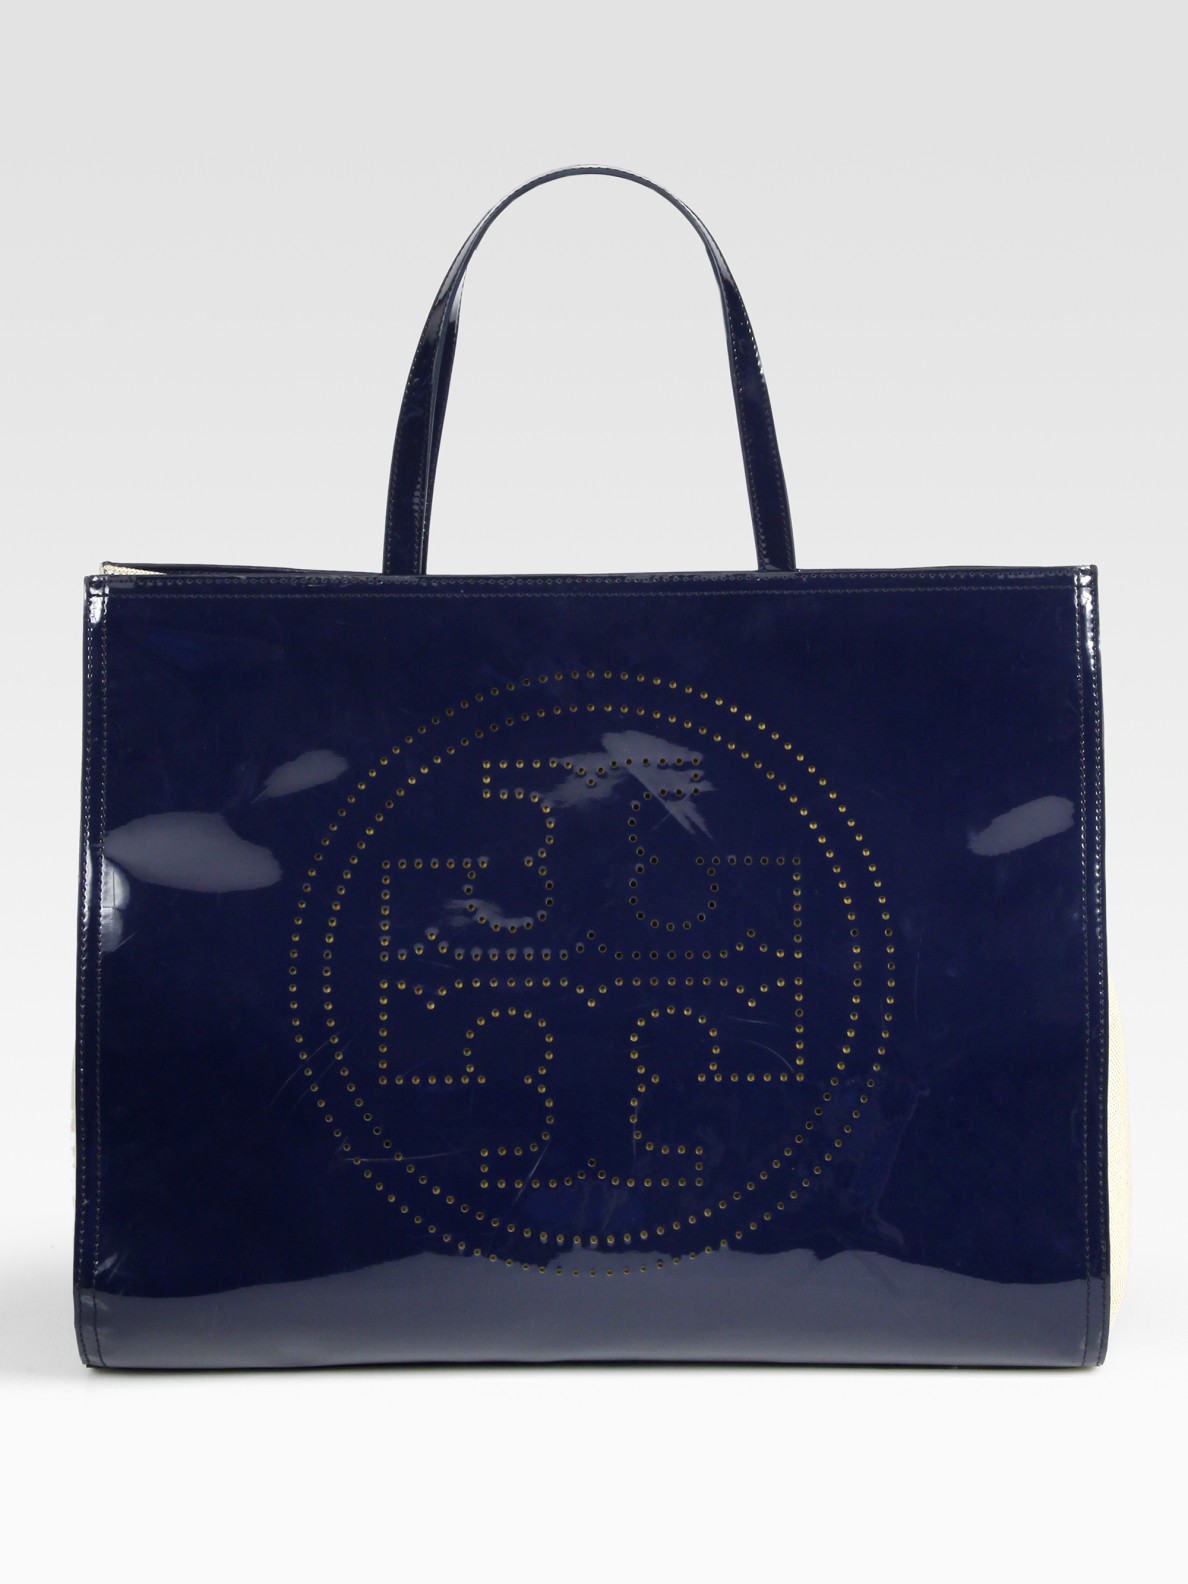 leather tote bag patent burch tory perforated bags lyst